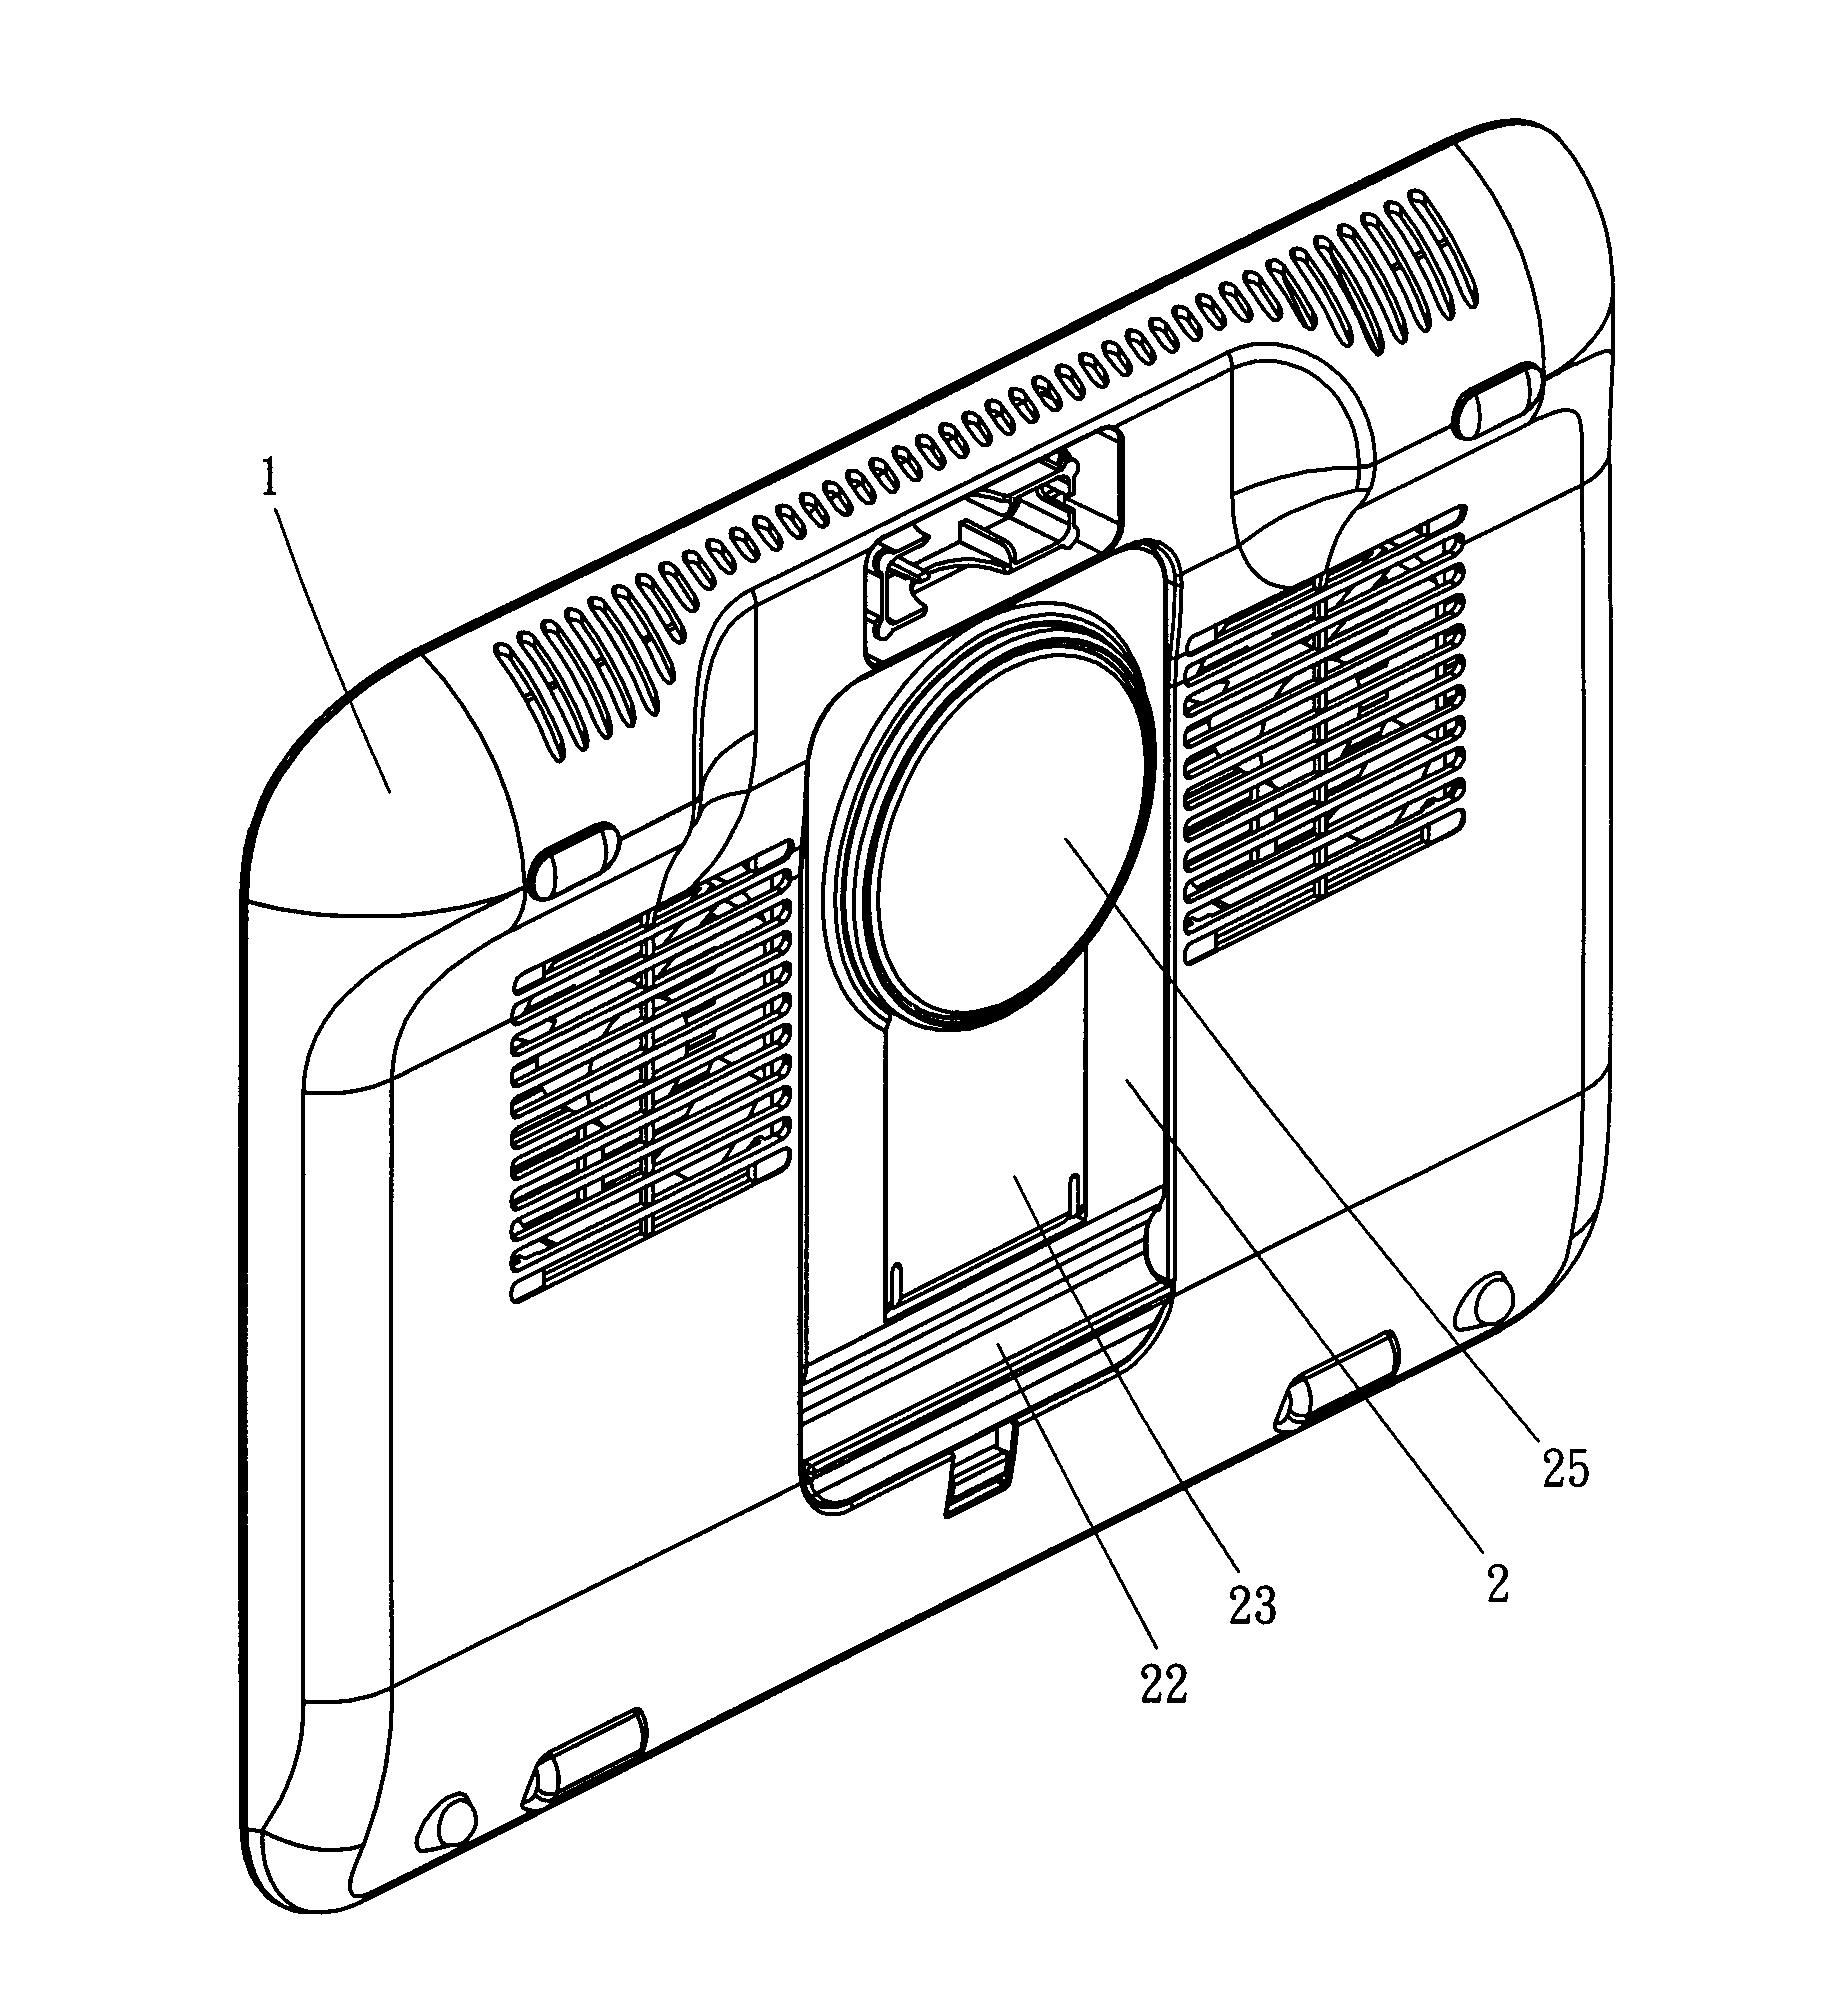 Tiltable notebook-computer cooling pad with tablet-computer bracket